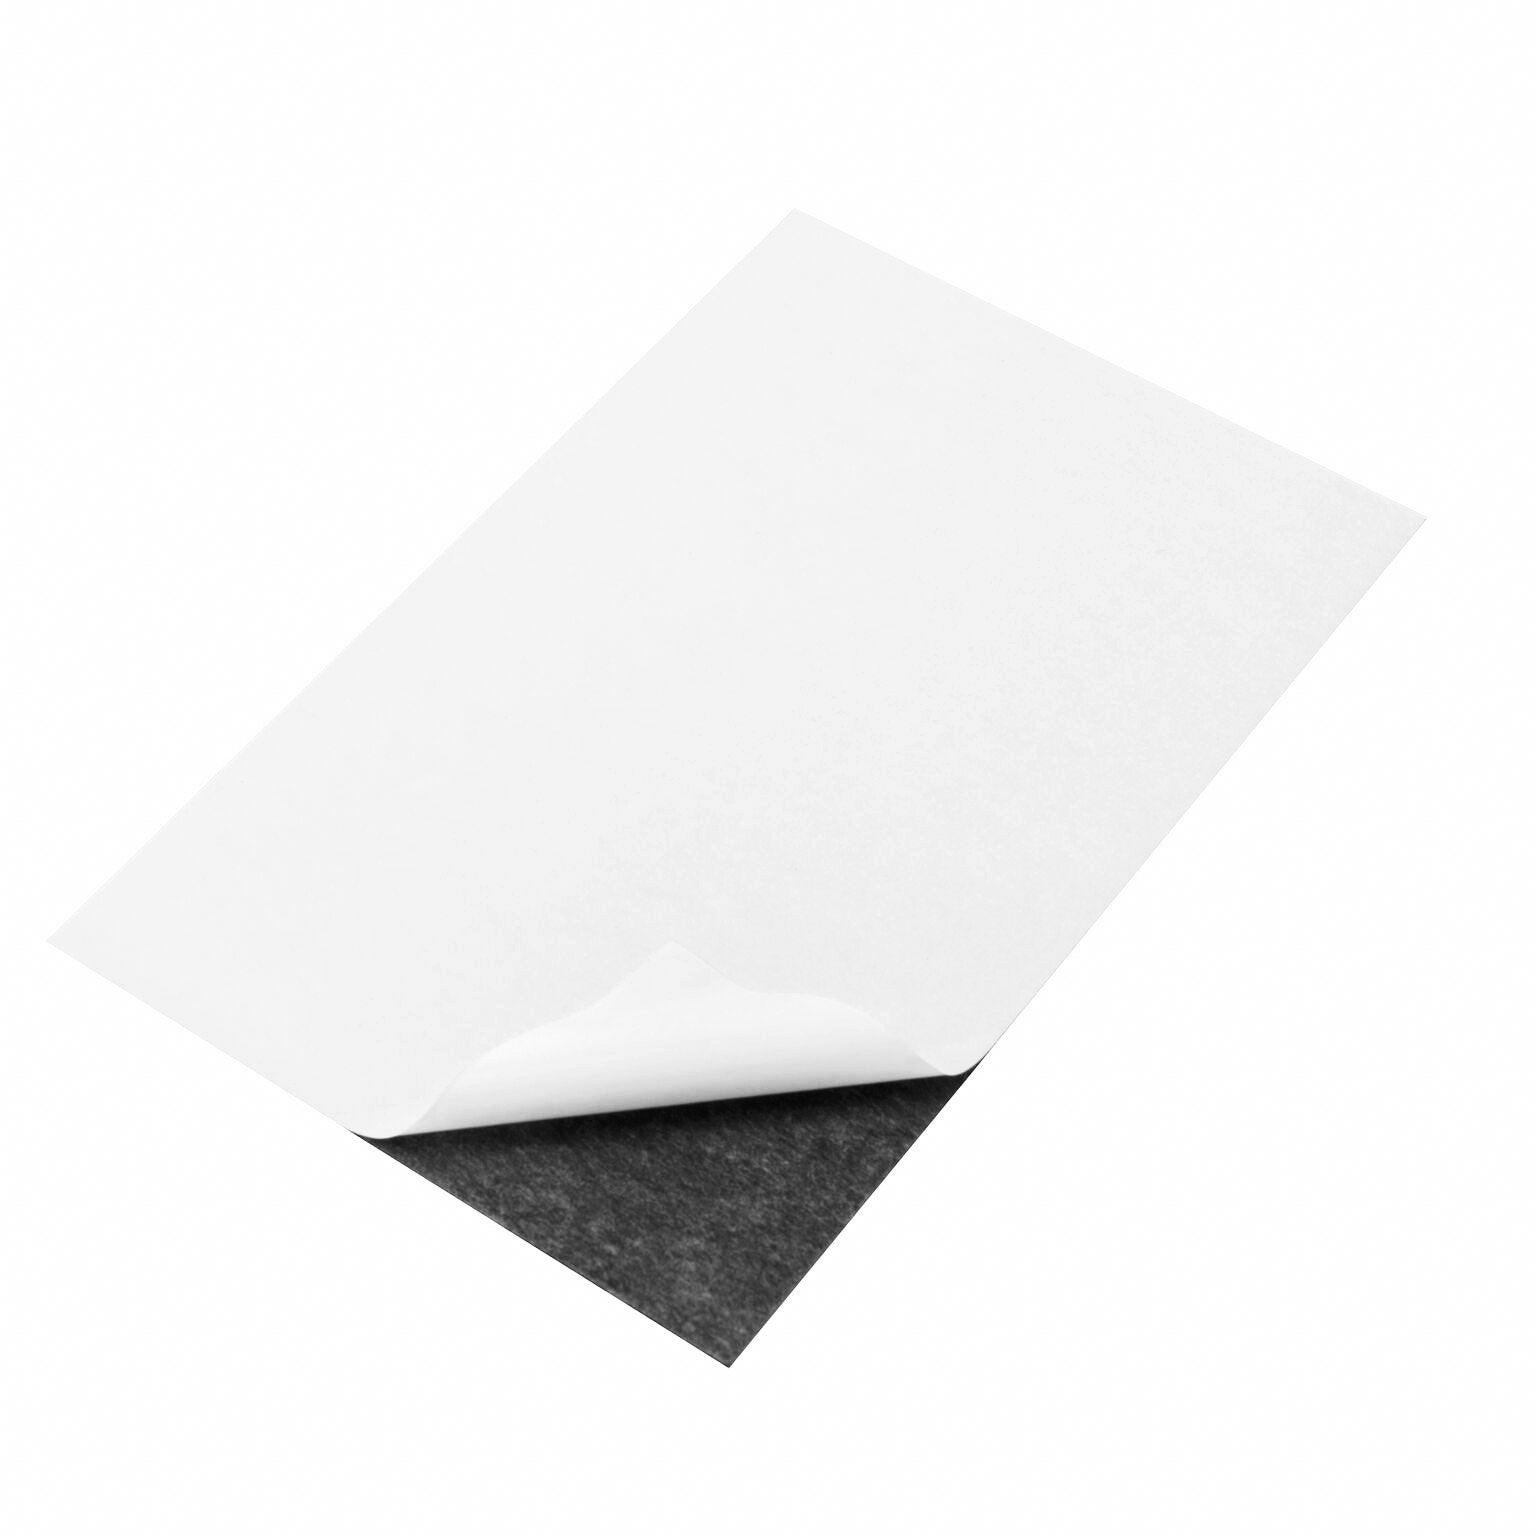 Adhesive Magnetic Sheets, 8 x 10, 4 Pack, Magnetic Sheet, Magnetic Paper,  Magnet Paper Sheets - Mr. Pen Store